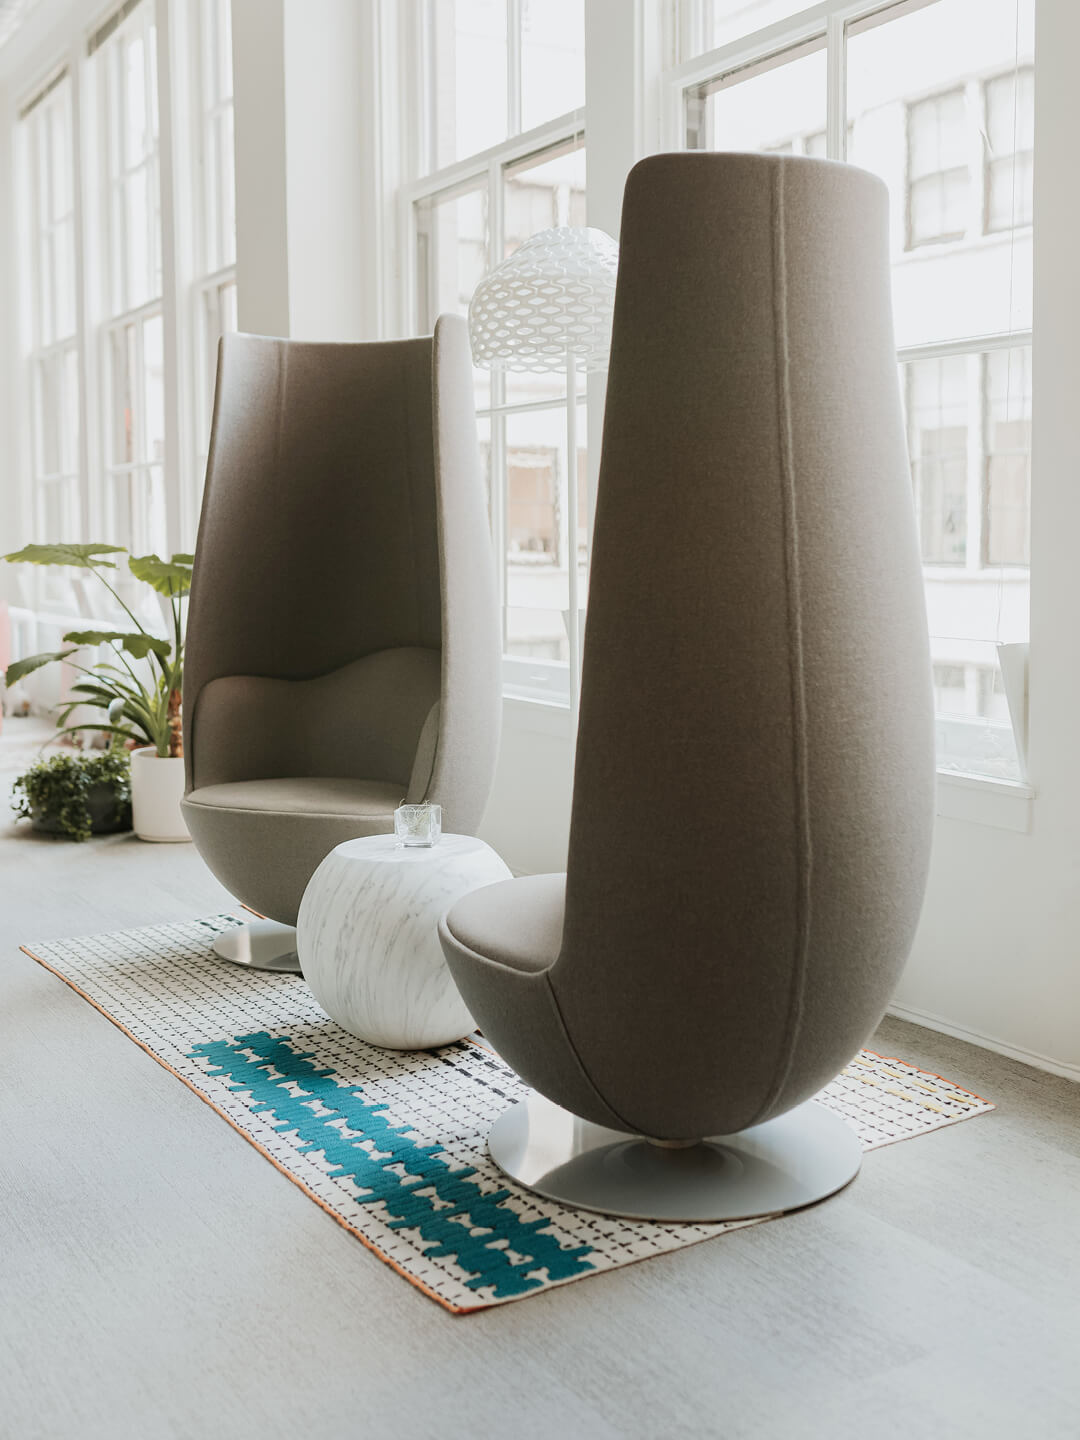 Haworth Marcel Wanders Design in open office space tall chairs and side table